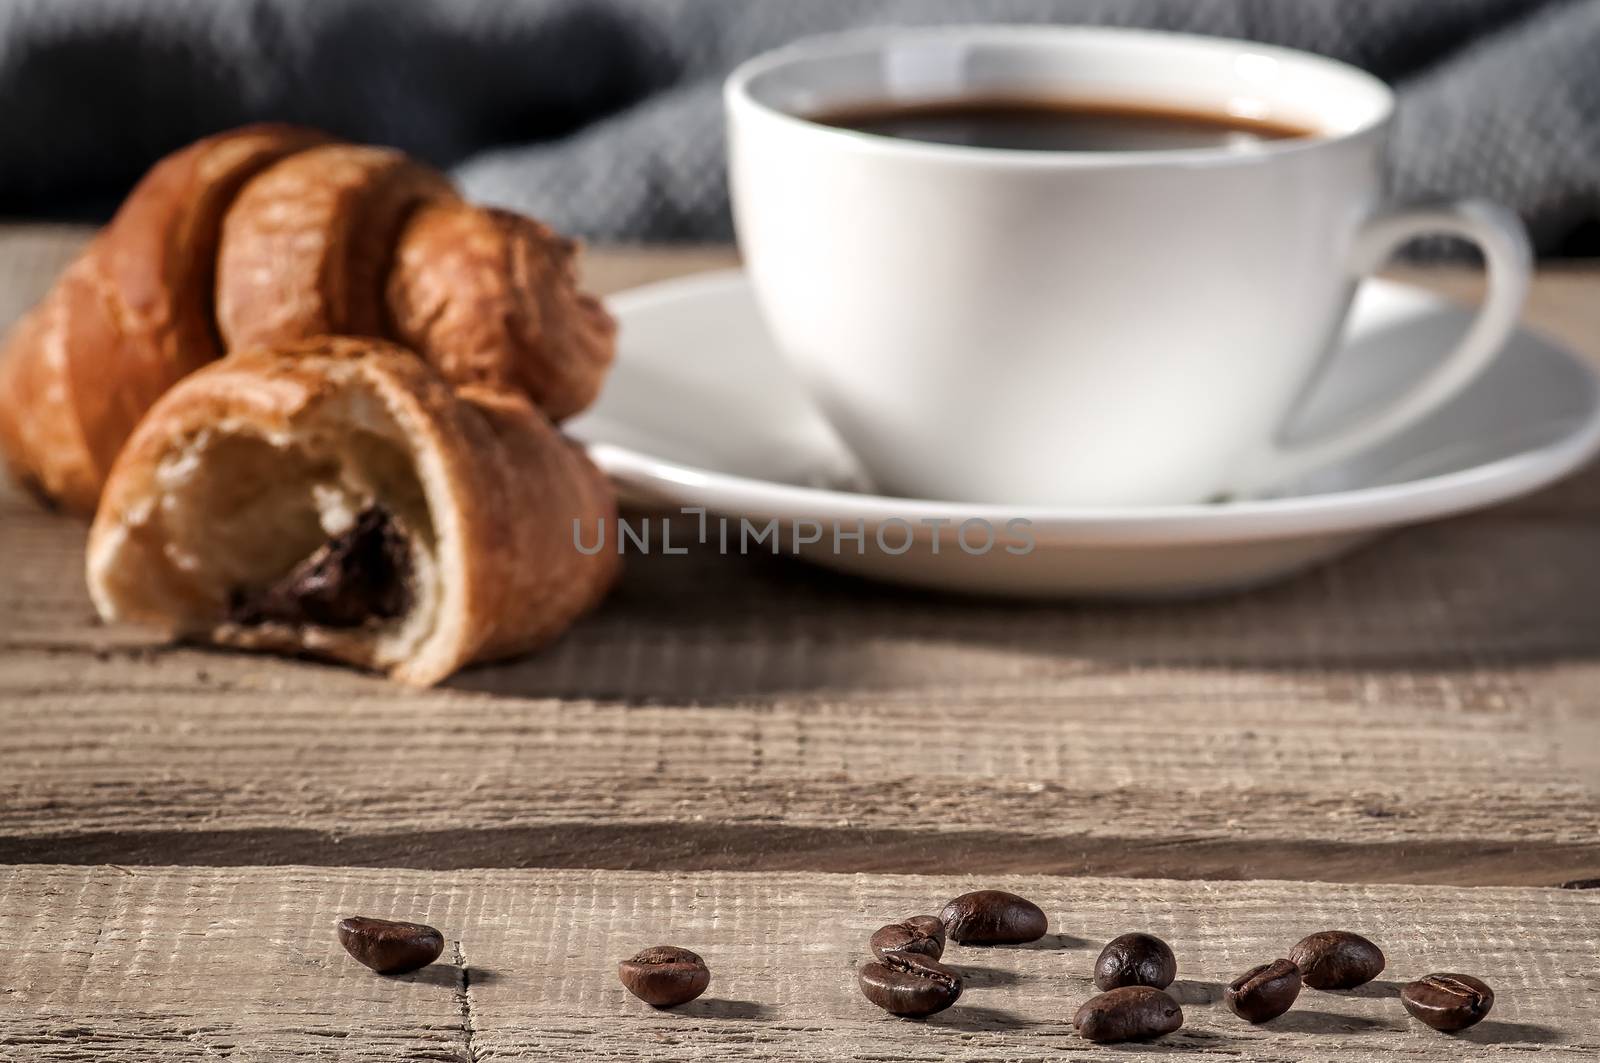 Coffee beans on the wooden table, blurred cup of coffee and a croissant in the background